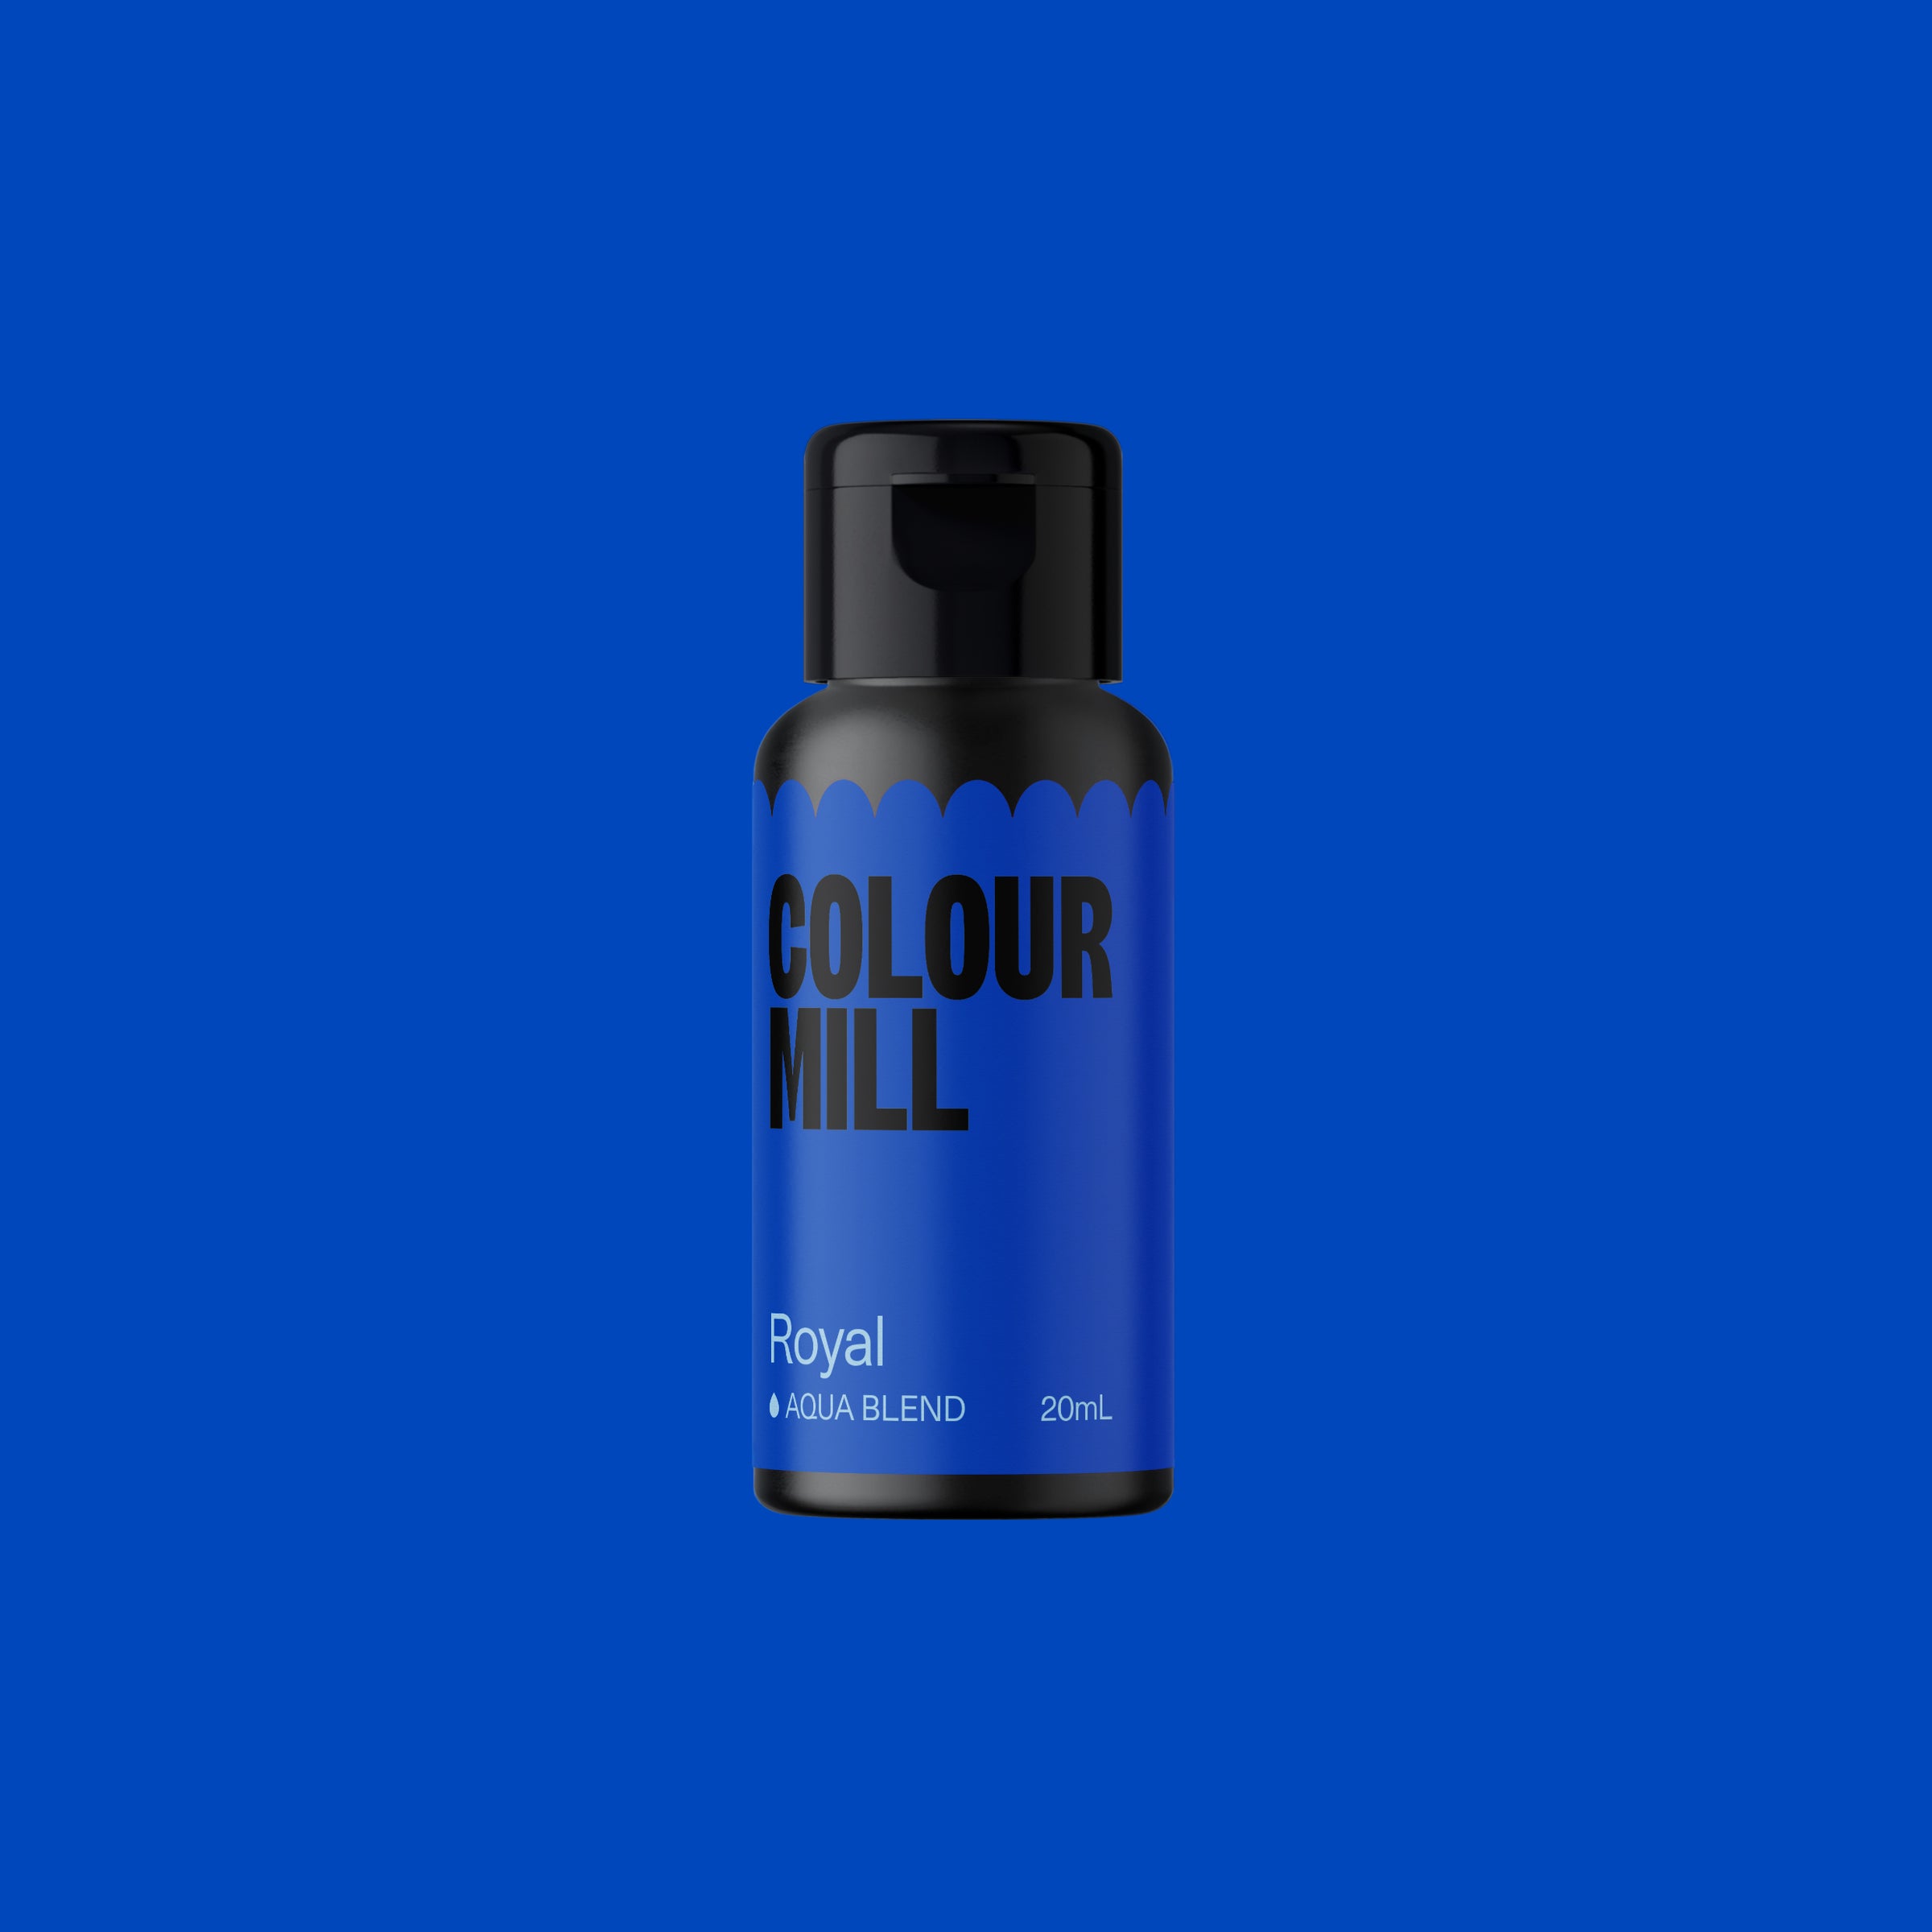 Oil Based Colouring 20ml Royal by Cake Craft Company